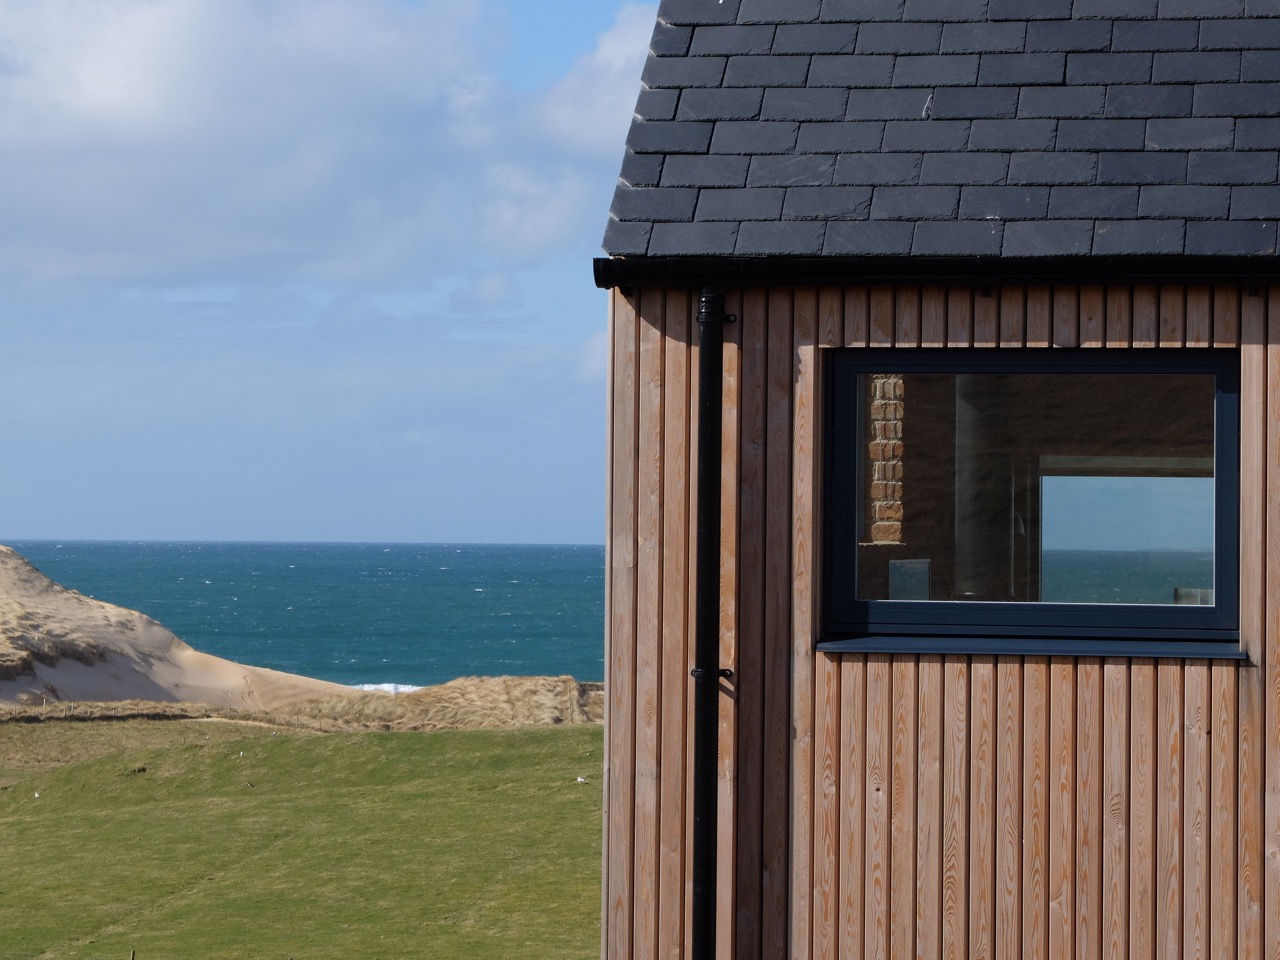 Pounding waves, sweeping stretches of empty sands, bracing walks …British beaches really come into their own out of season. Recharge in these eco beach hideaways